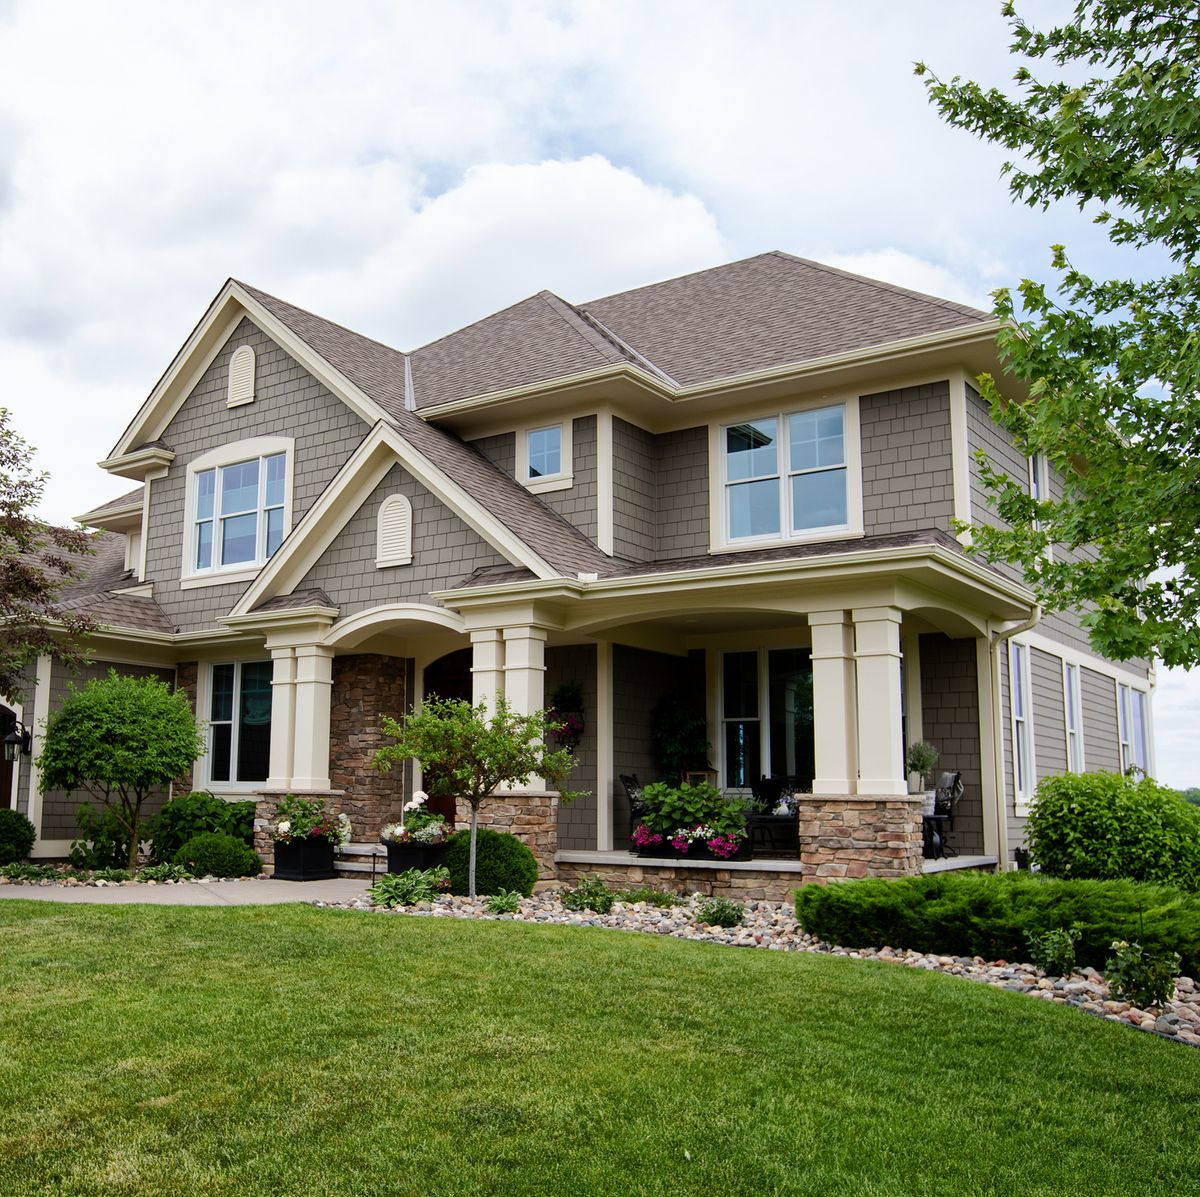 Enhance Your Home’s Appeal with Payless Siding & Windows: Amarillo’s Premier Siding and Window Experts